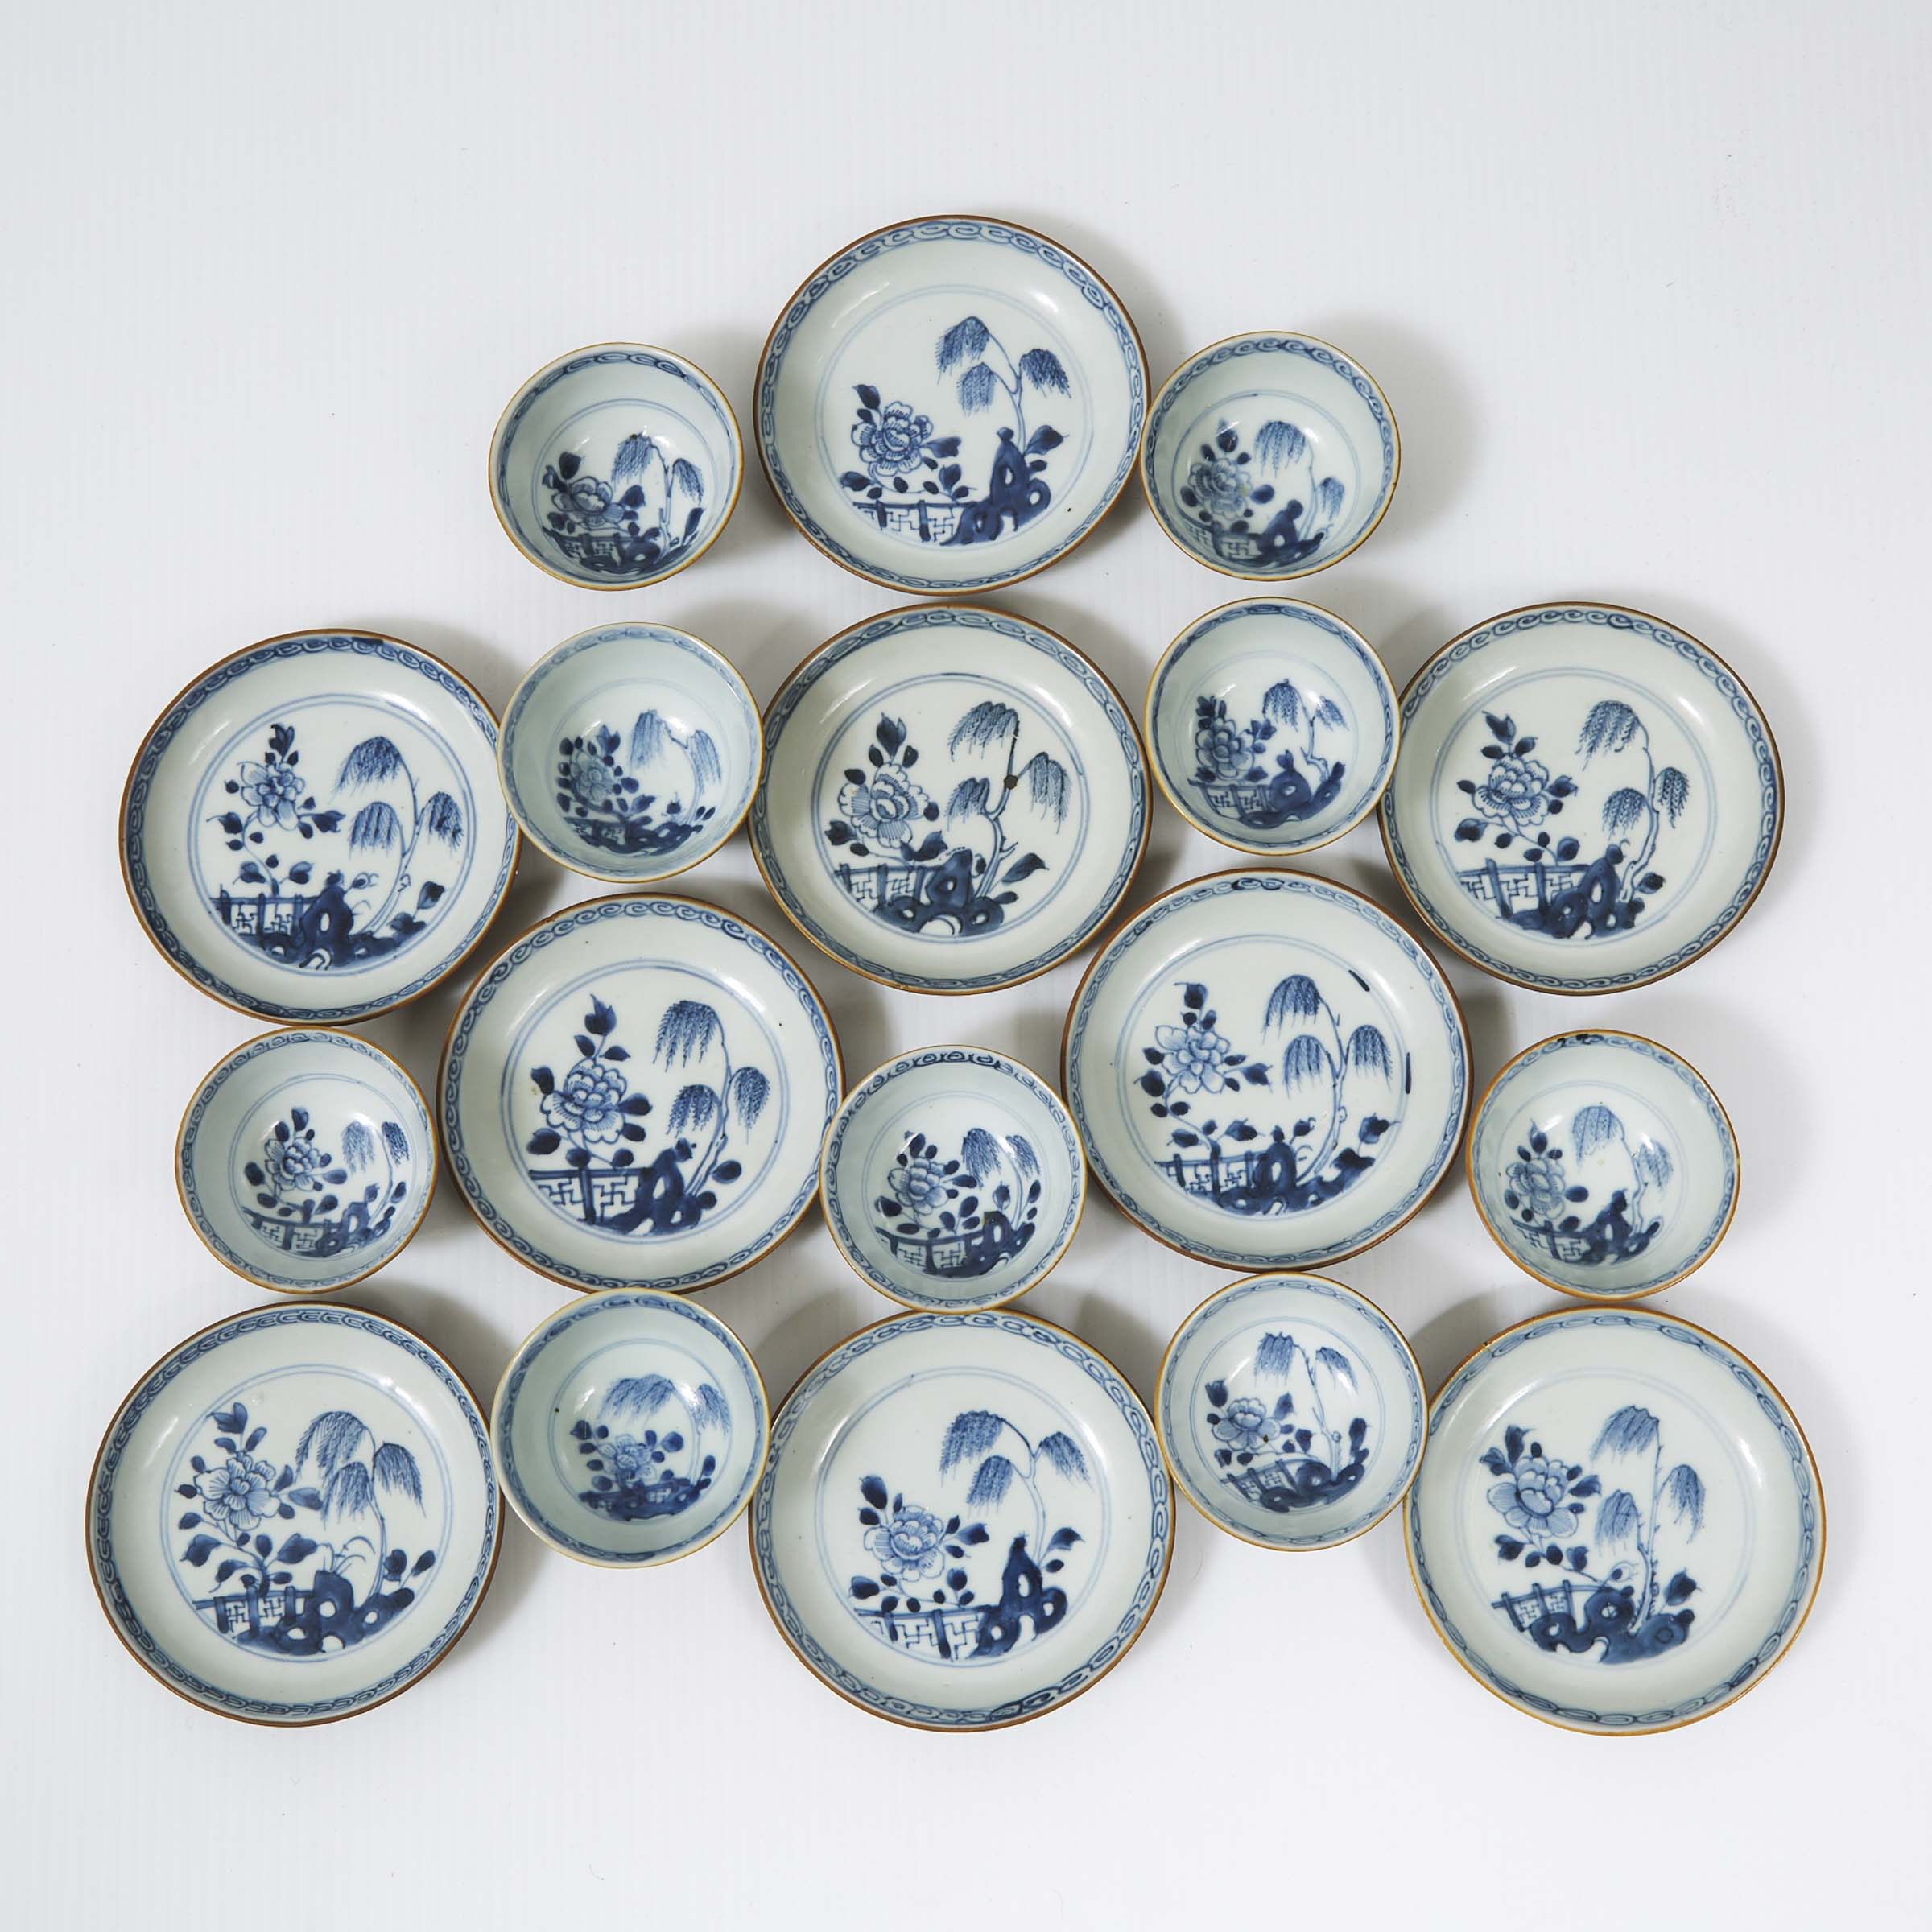 A Set of Eighteen 'Batavian Willow' Pattern Teabowls and Saucers from the Nanking Cargo, Qianlong Period, Circa 1750